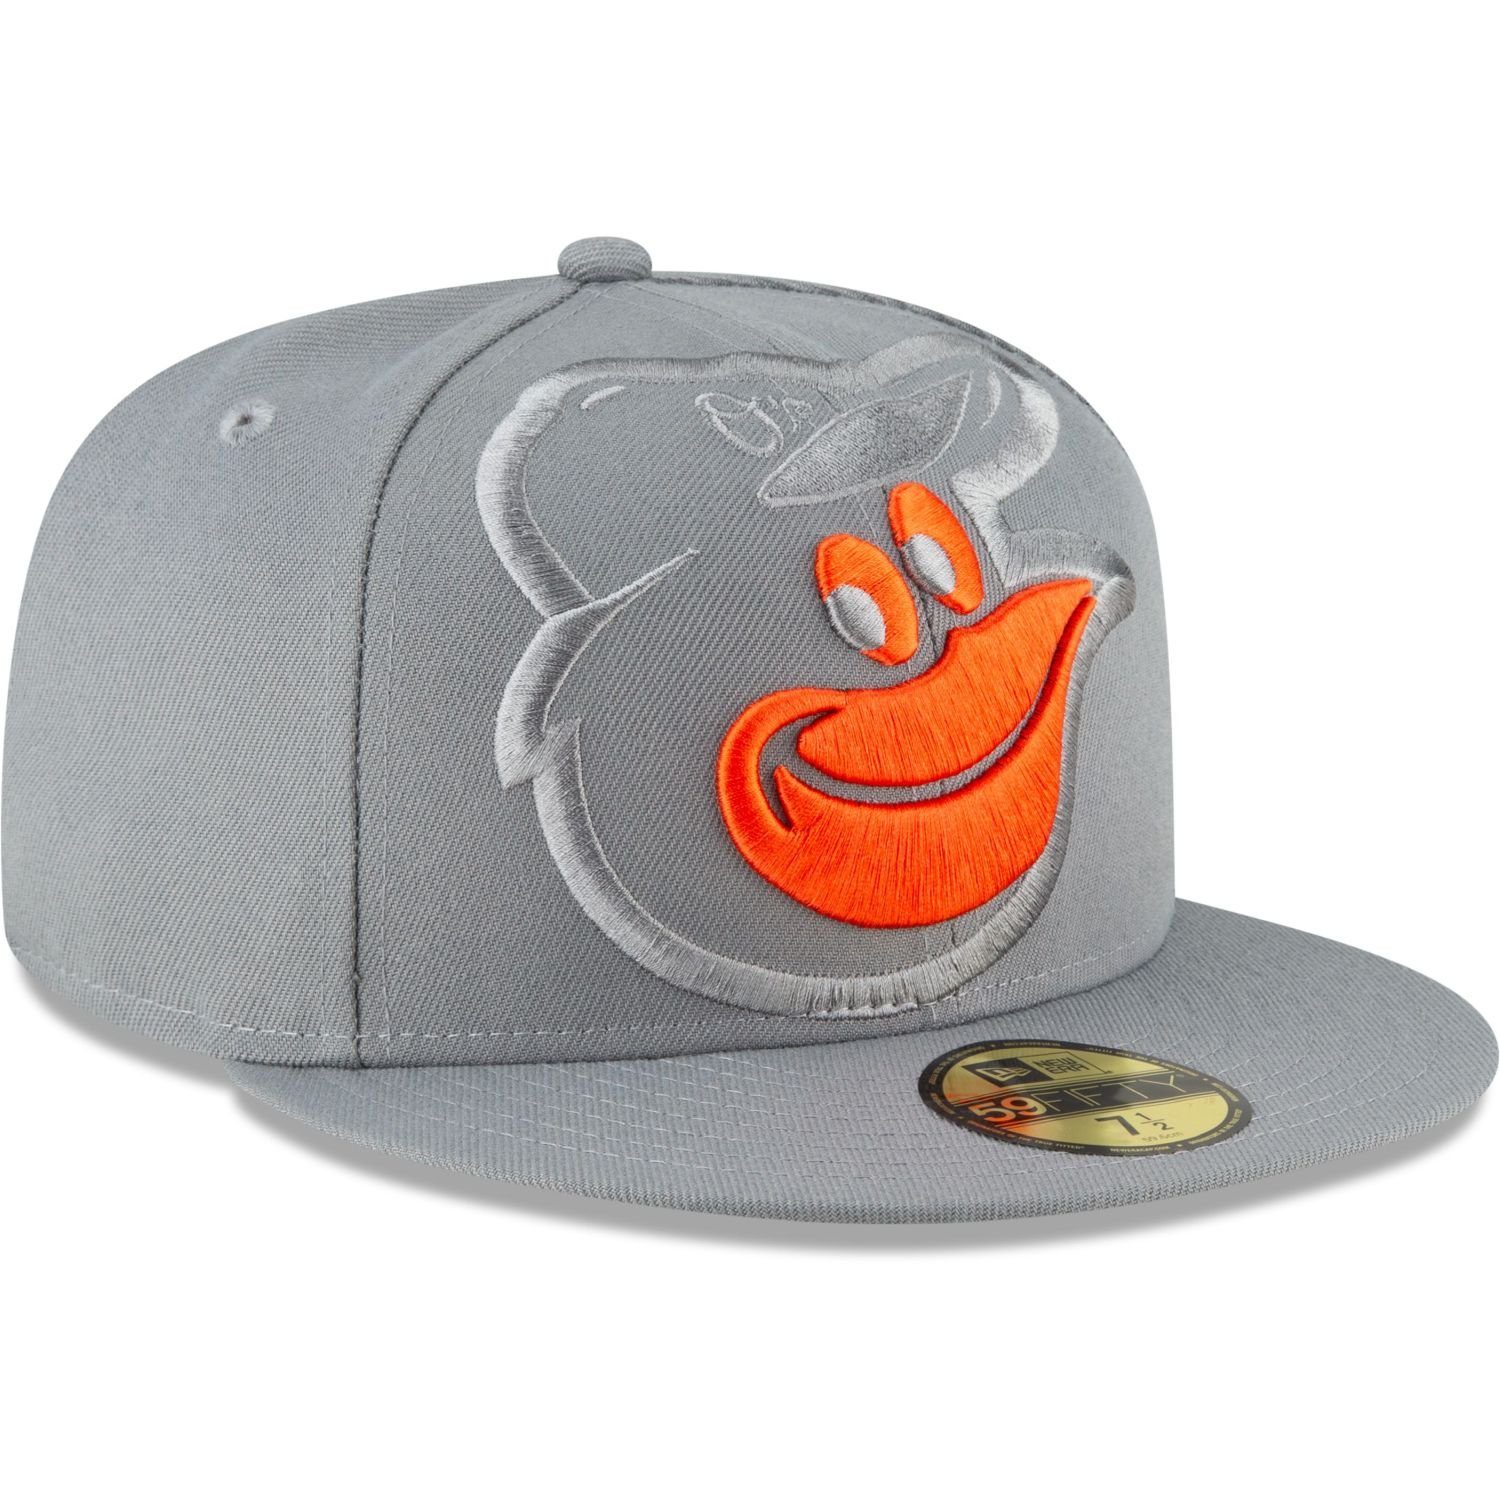 Team Cap Fitted MLB Orioles 59Fifty STORM Baltimore Cooperstown Era GREY New